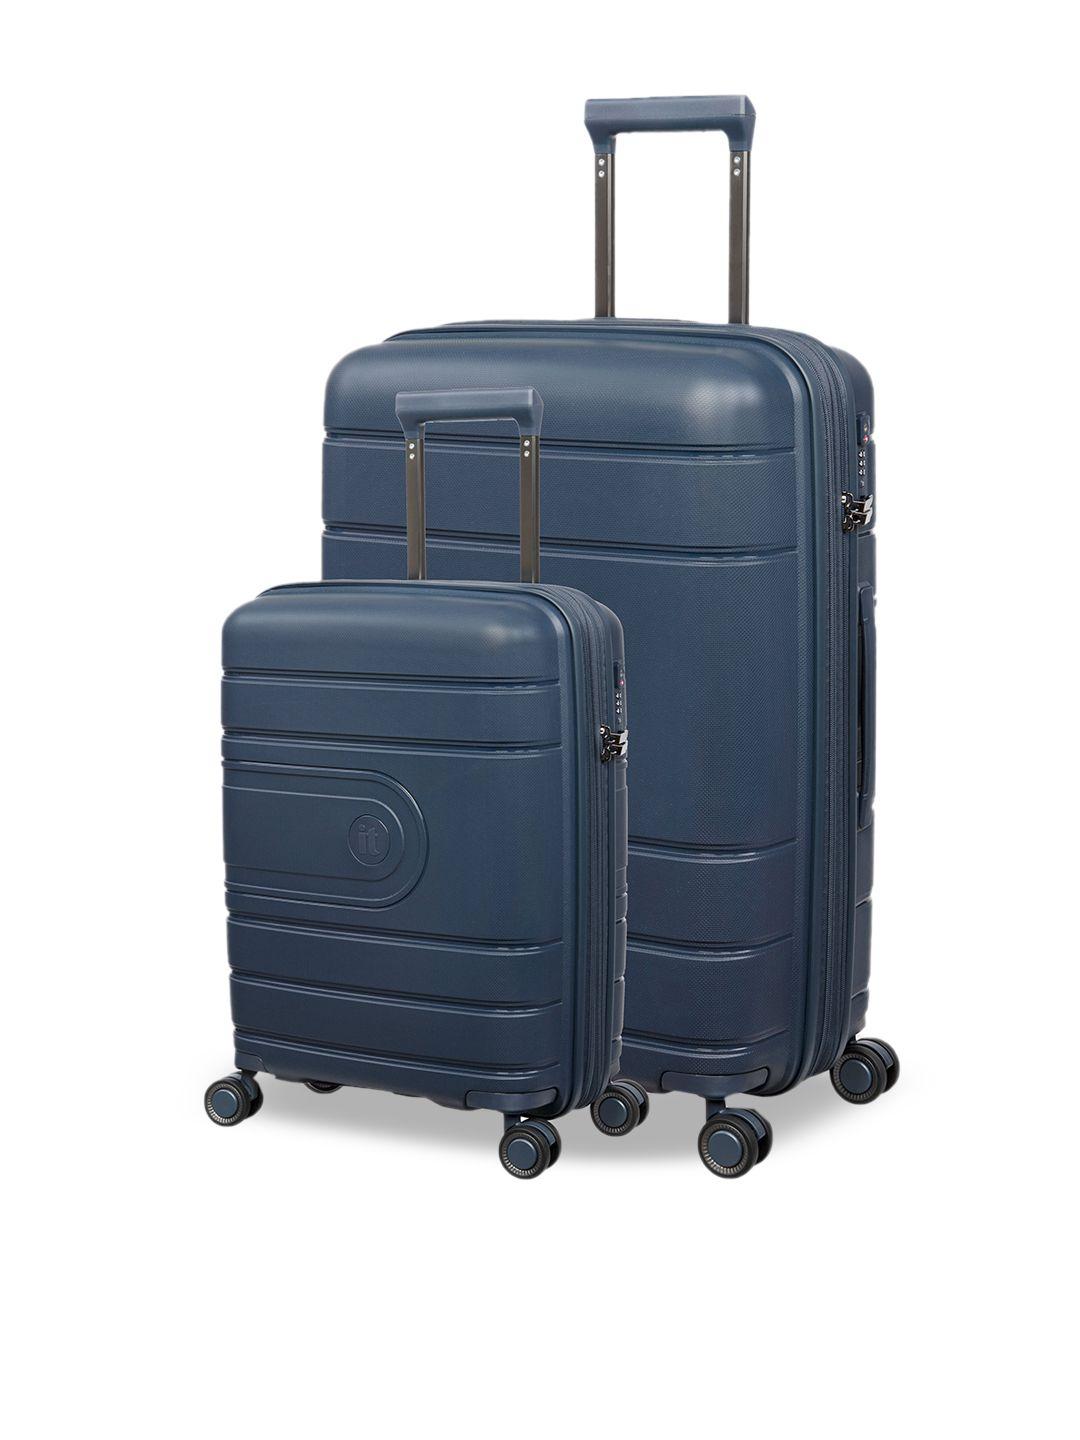 it luggage set of 2 blue textured hard-sided large trolley suitcases